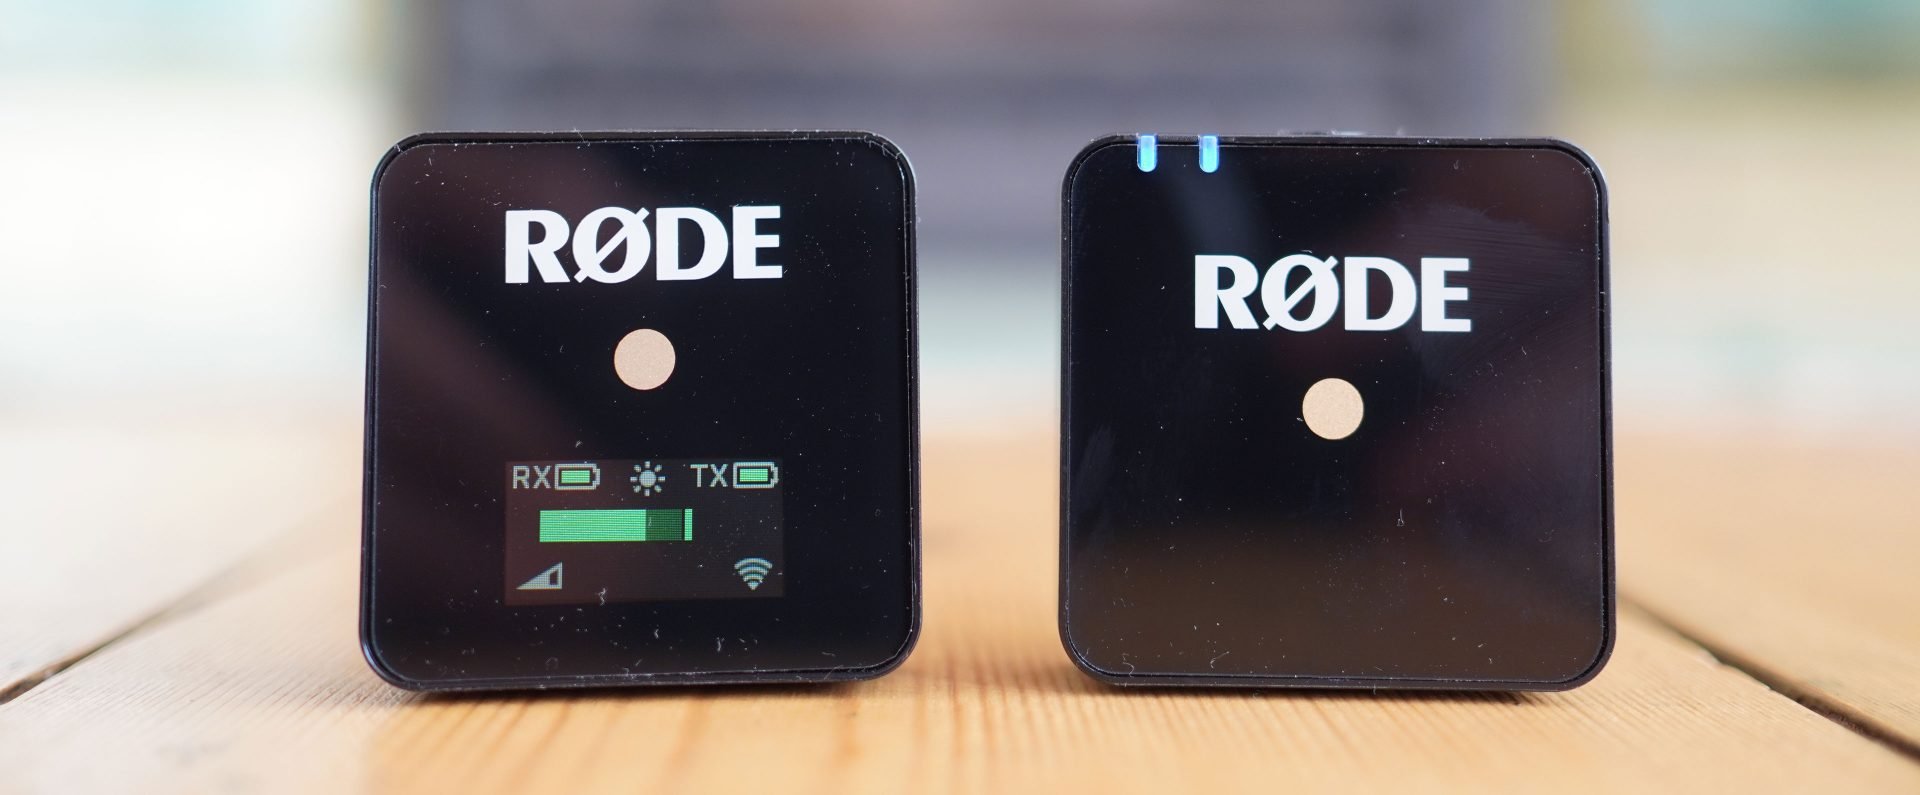 Rode Wireless Go II Review